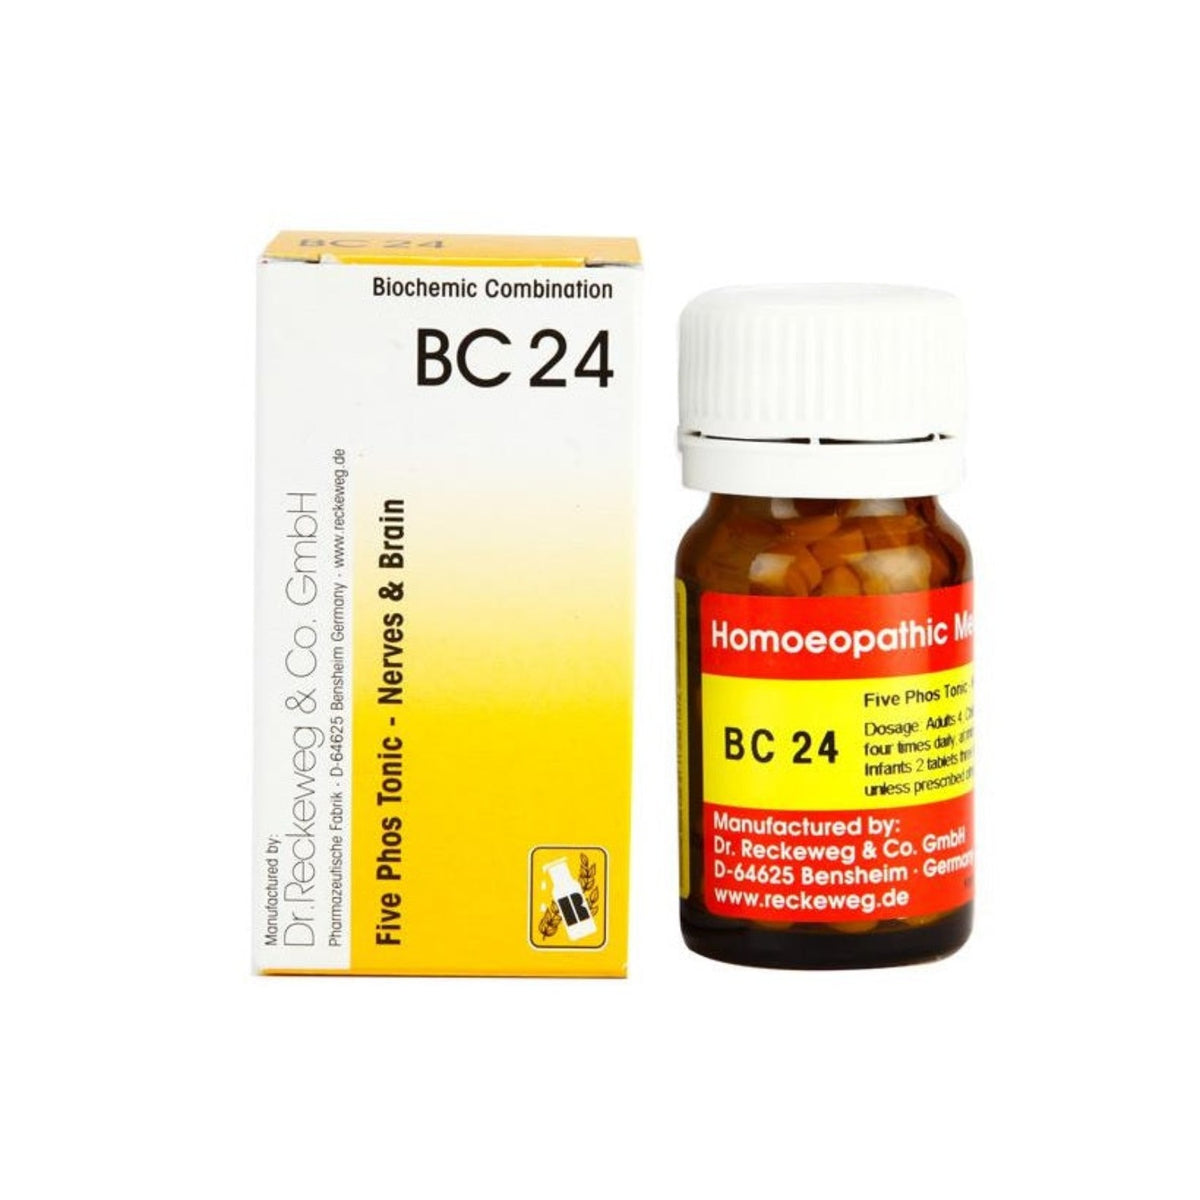 Dr. Reckeweg Homoeopathy Five Phos Tonic - Nerves & Brain Bio-Combination 24 (BC 24) 20gm Tablet